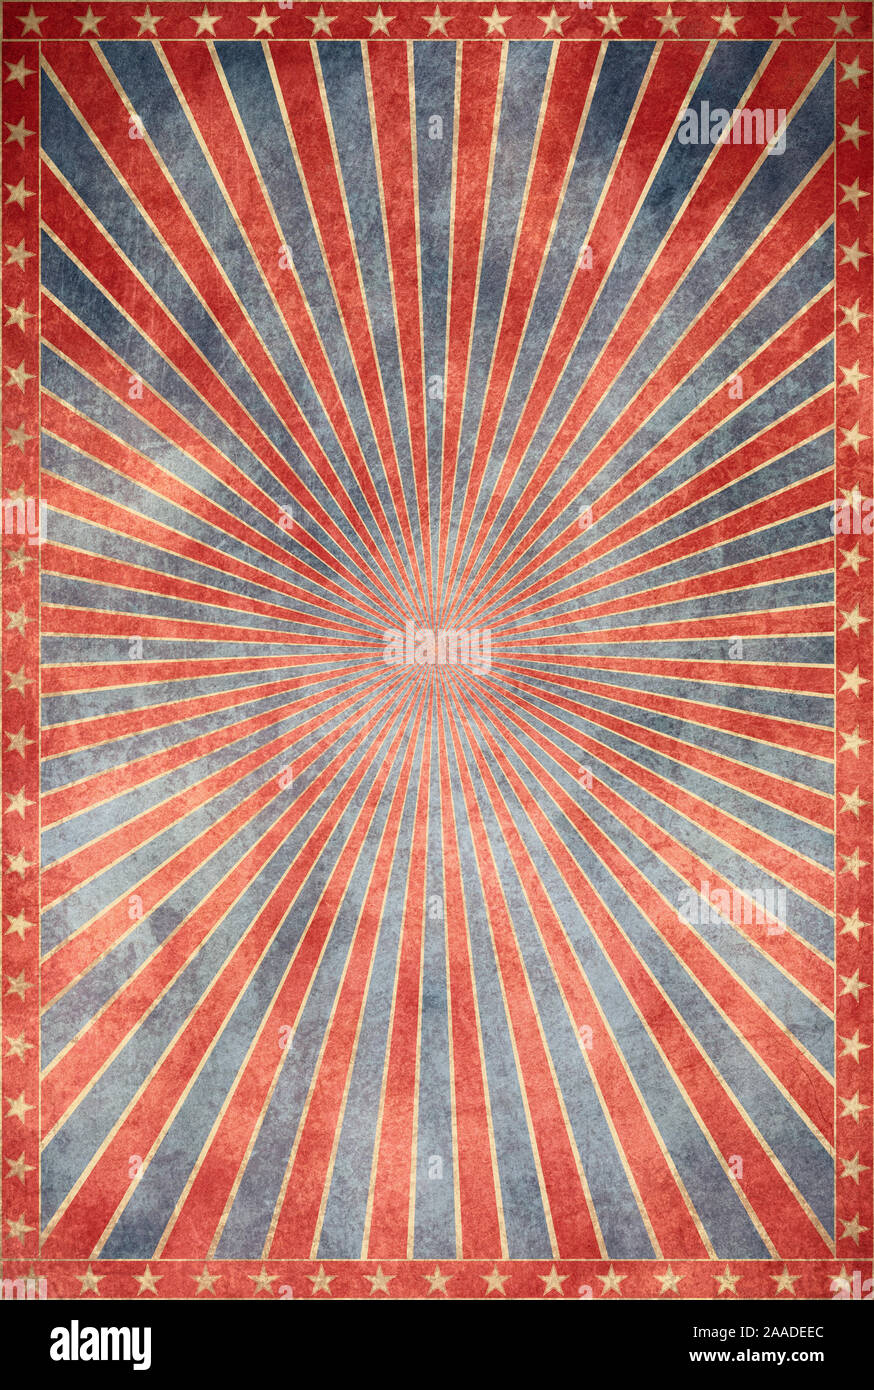 Retro grunge background with red and blue rays and star frame. Stock Photo